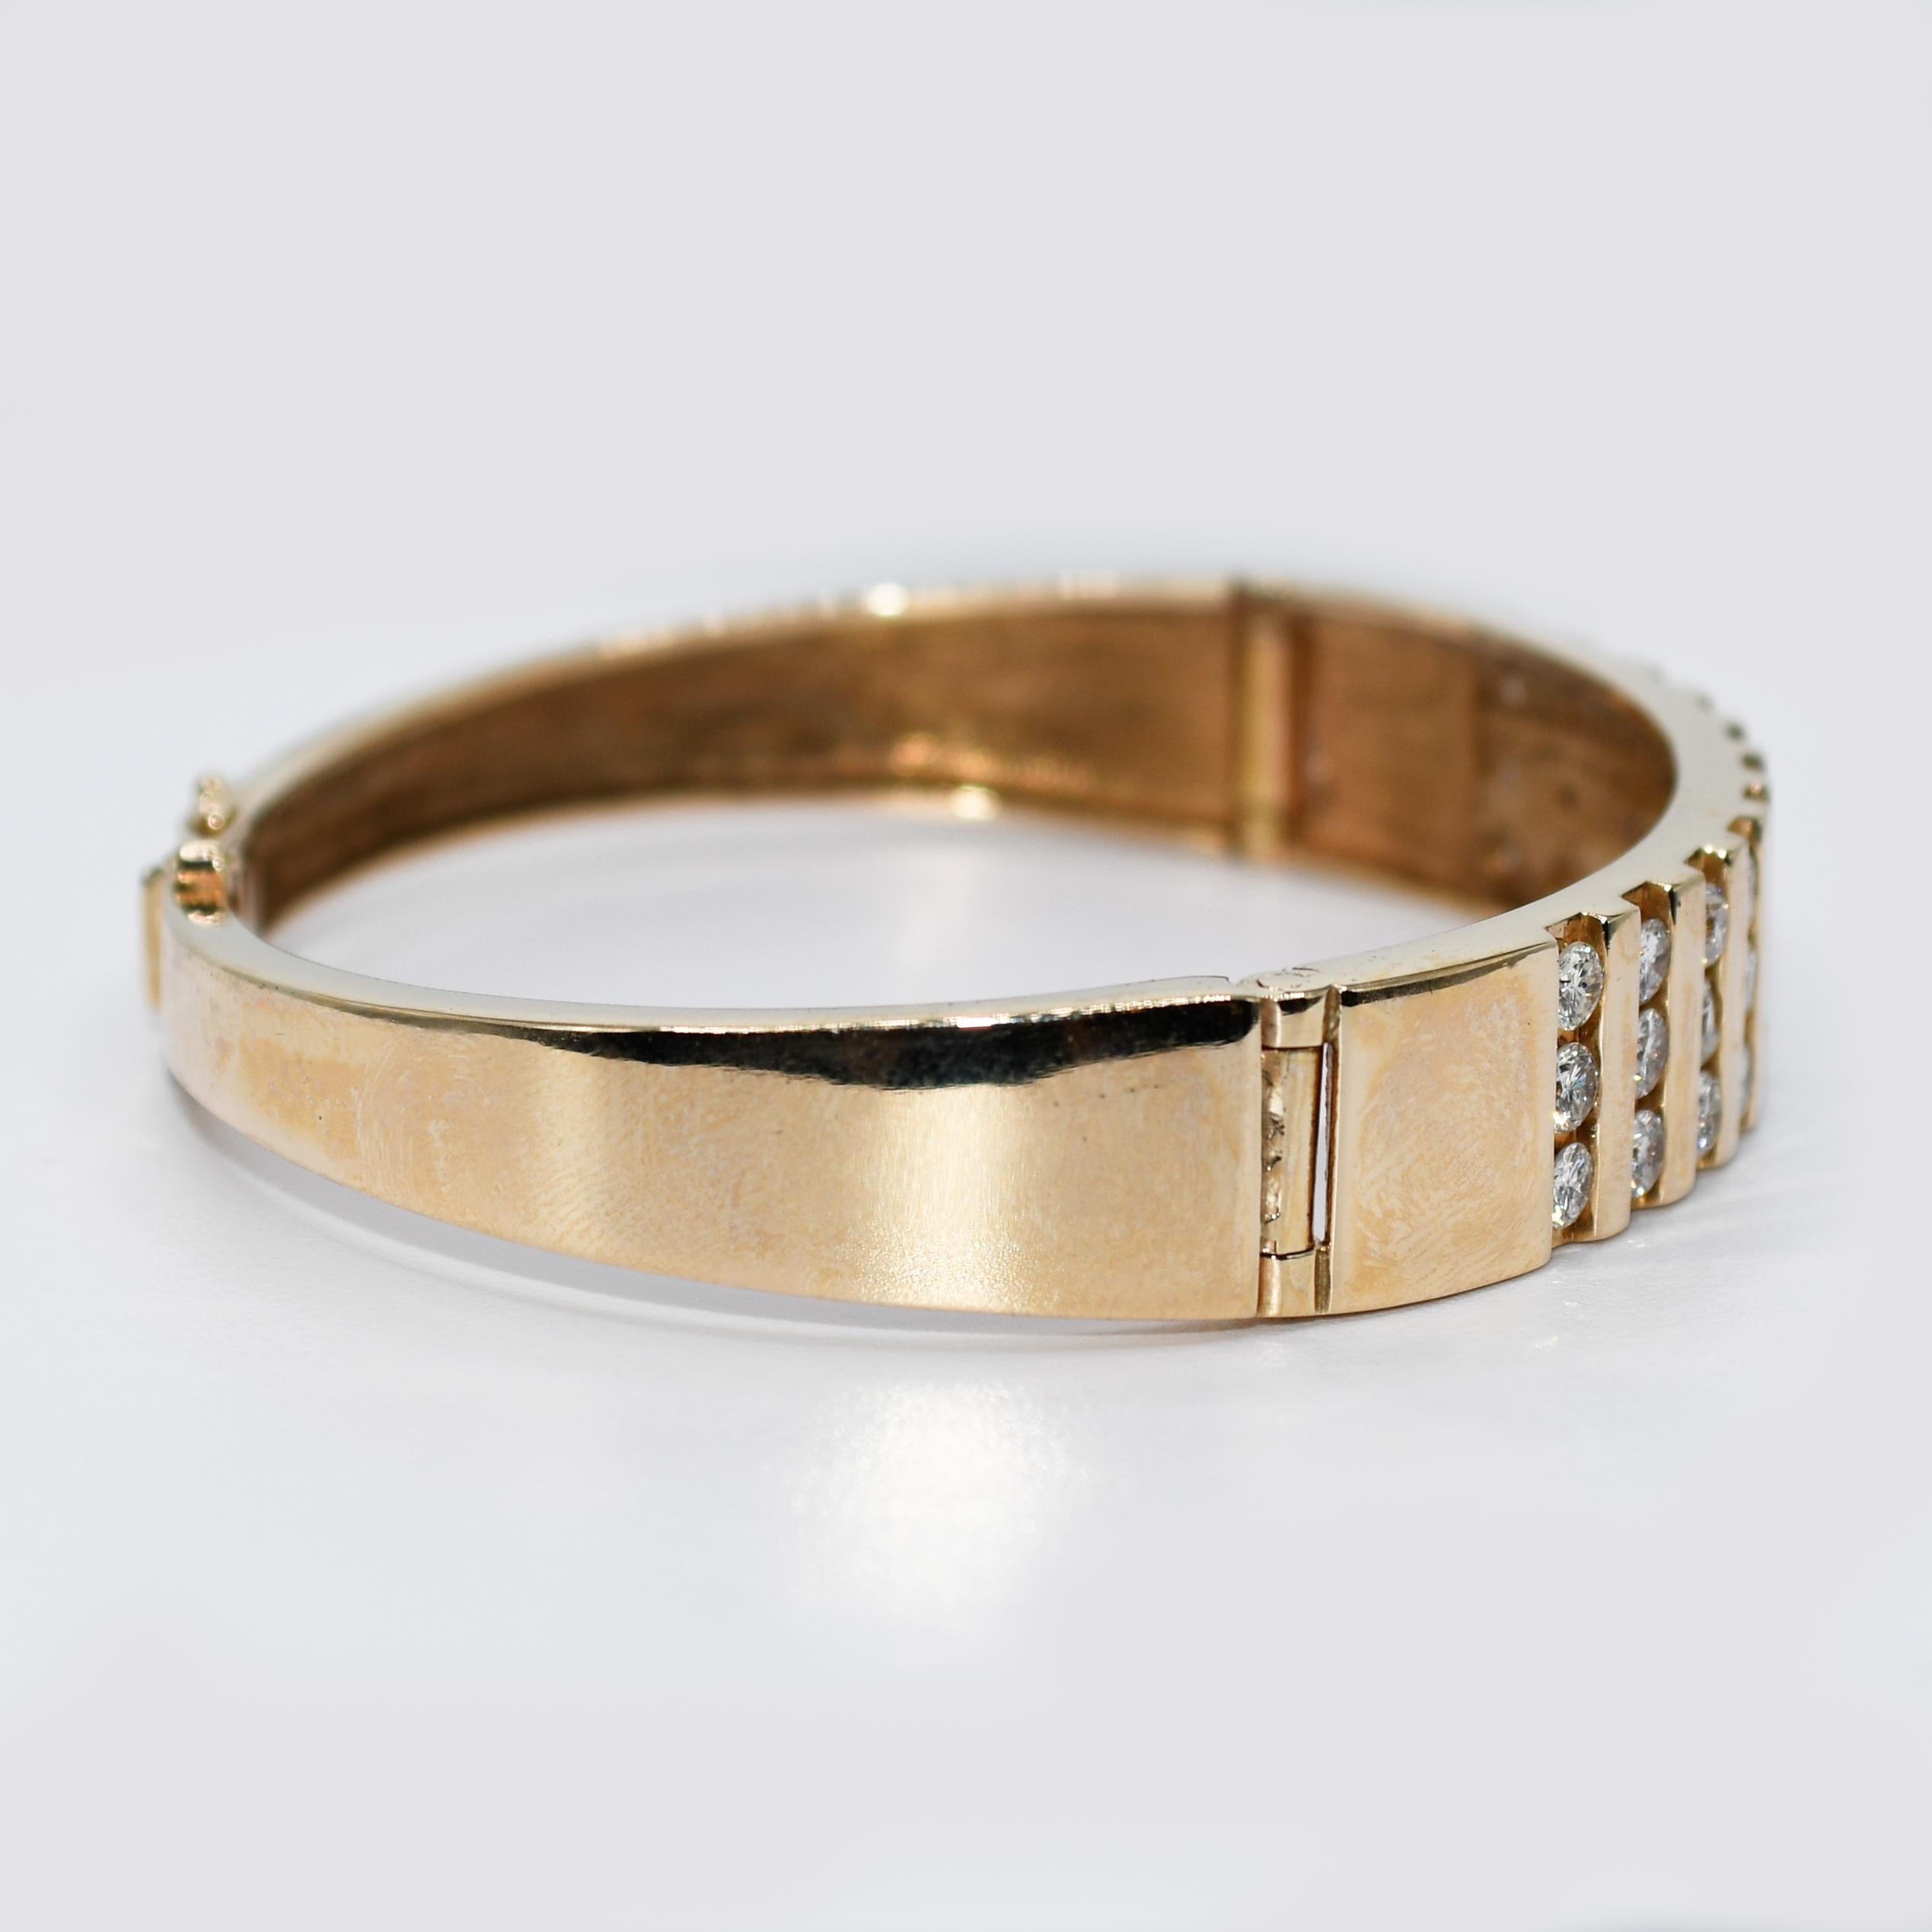 14K Yellow Gold Diamond Bangle Bracelet, 1.75TDW, 23.8g

14k yellow gold and diamond bangle bracelet.
Tests 14k and weighs 23.8 grams.
The diamonds are round brilliant cuts, 1.75 total carats, H to i color, Si clarity.
The bangle measures 10.5mm